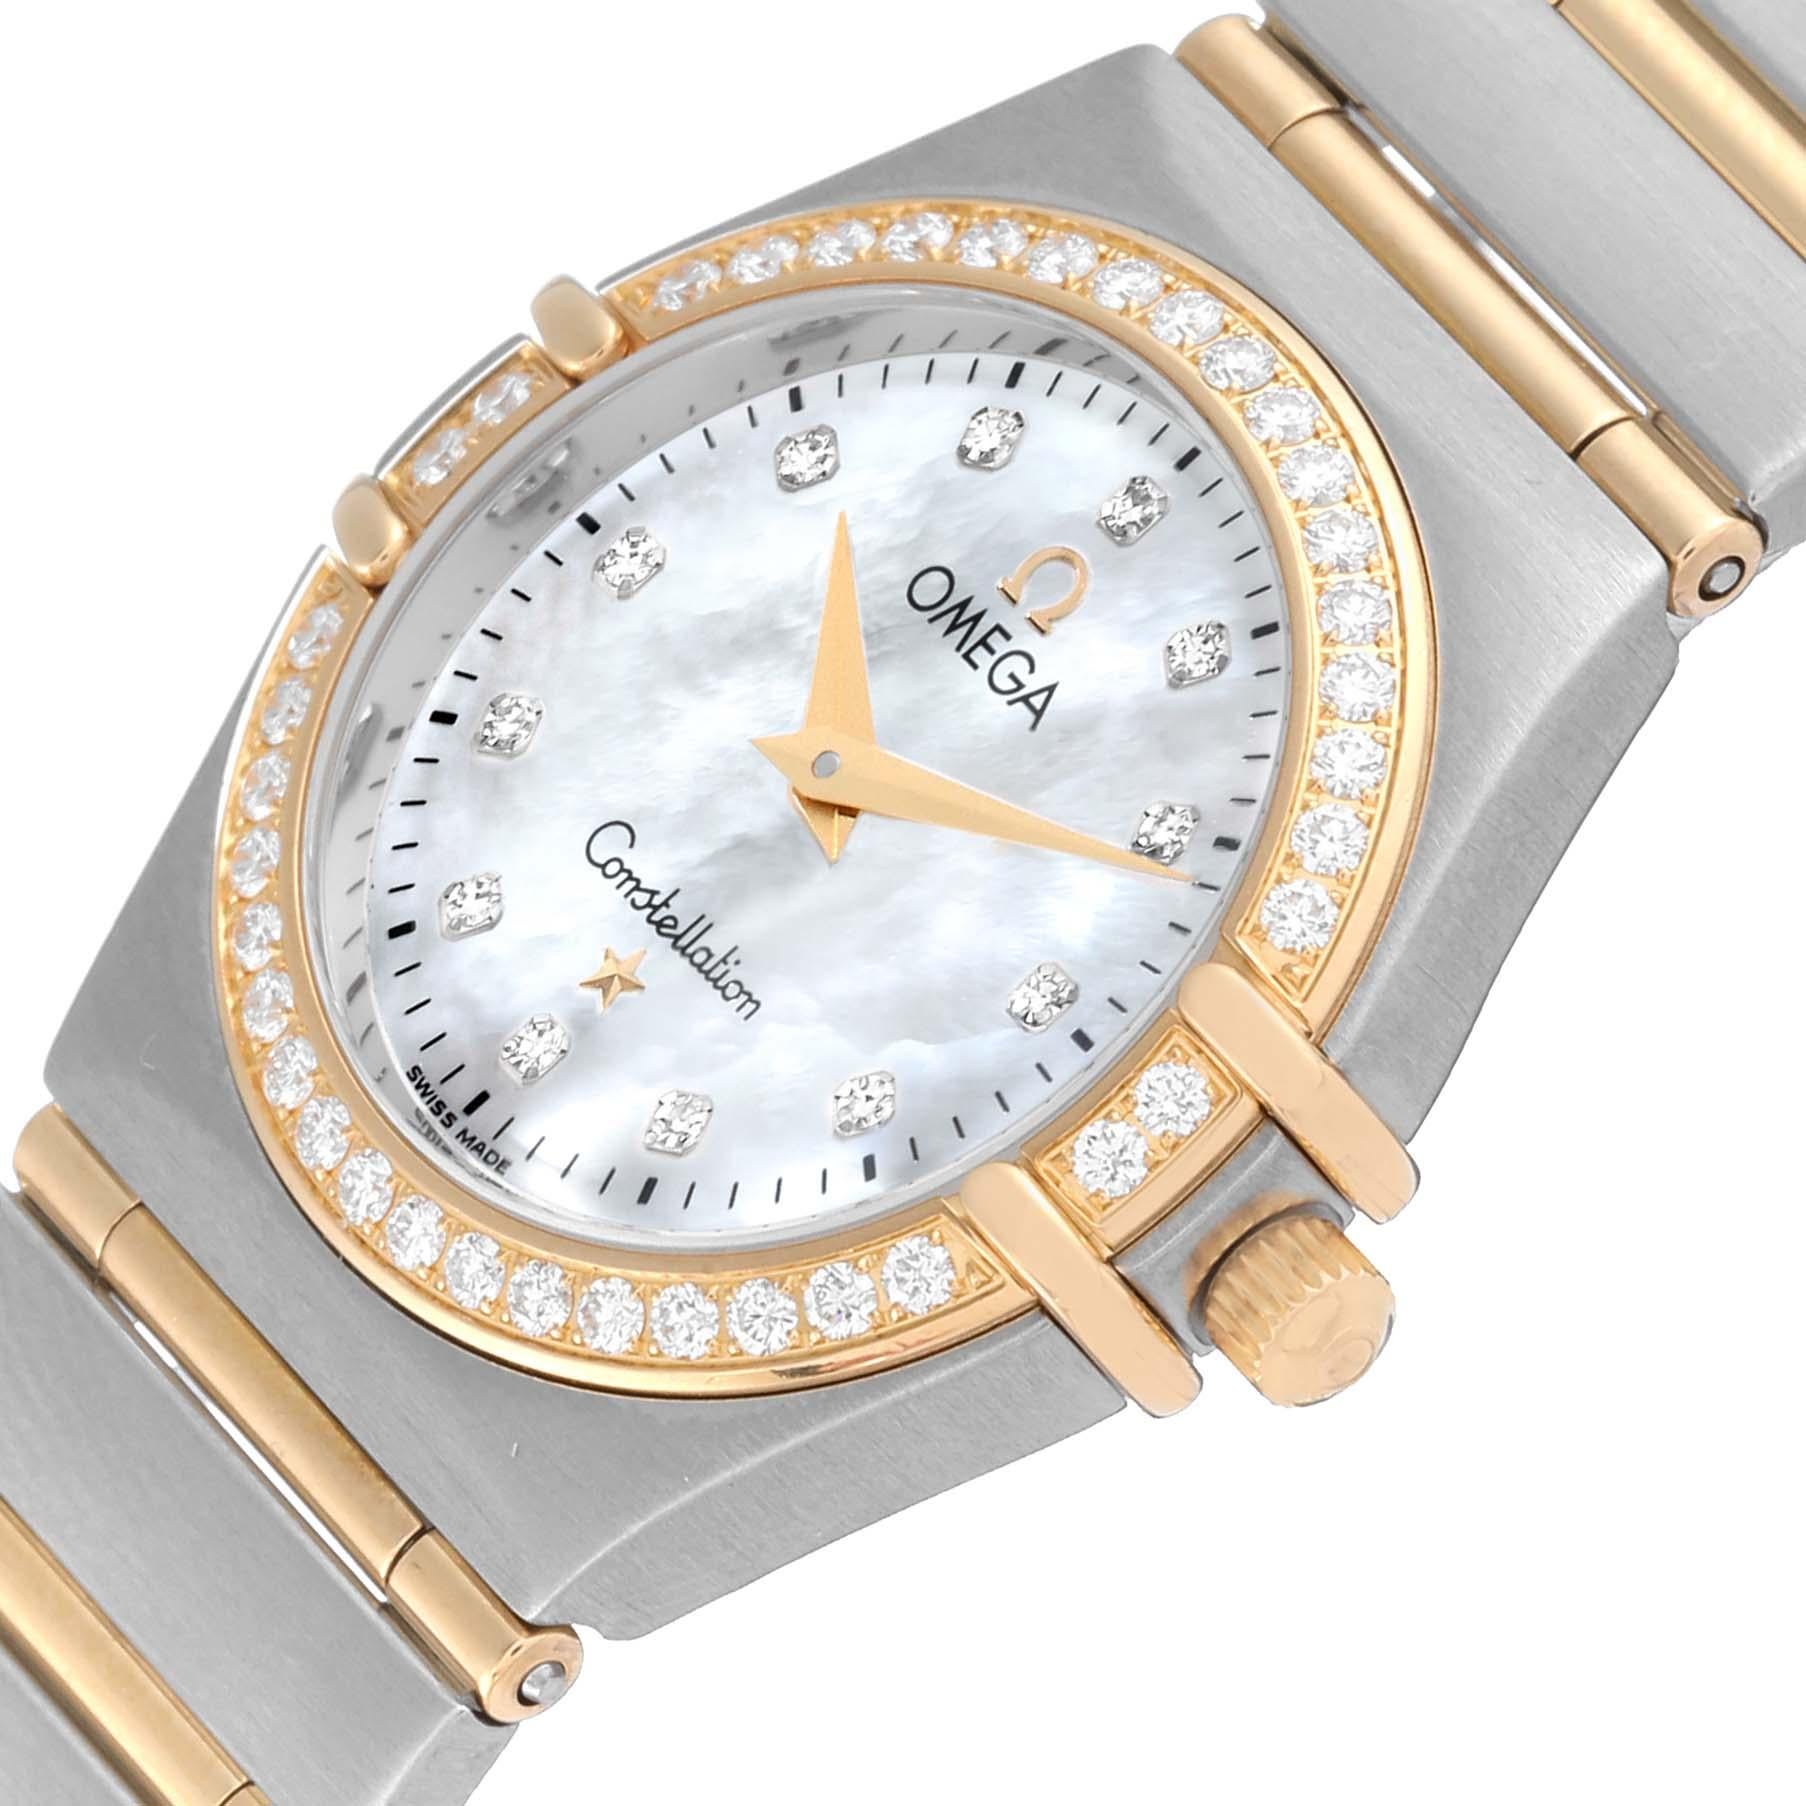 Omega Constellation 95 Steel Yellow Gold Mother Of Pearl Diamond Ladies Watch 1277.75.00. Quartz movement. Stainless steel and 18k yellow gold round case 25.5 mm in diameter. Original Omega factory 18k yellow gold diamond bezel. Scratch resistant